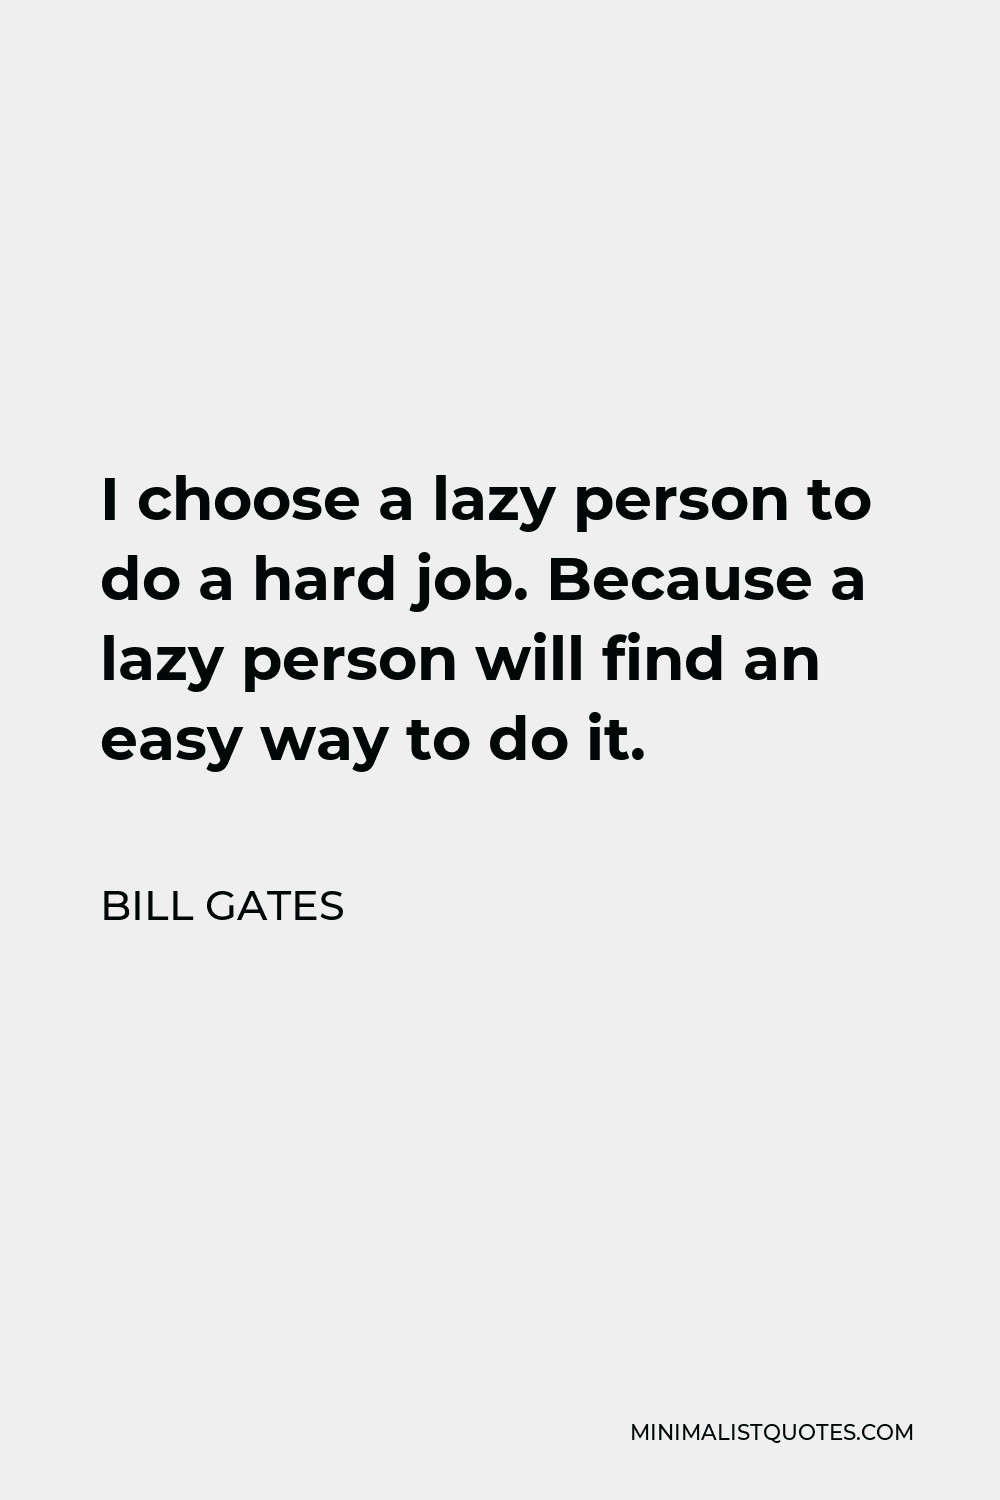 Bill Gates Quote - I choose a lazy person to do a hard job. Because a lazy person will find an easy way to do it.